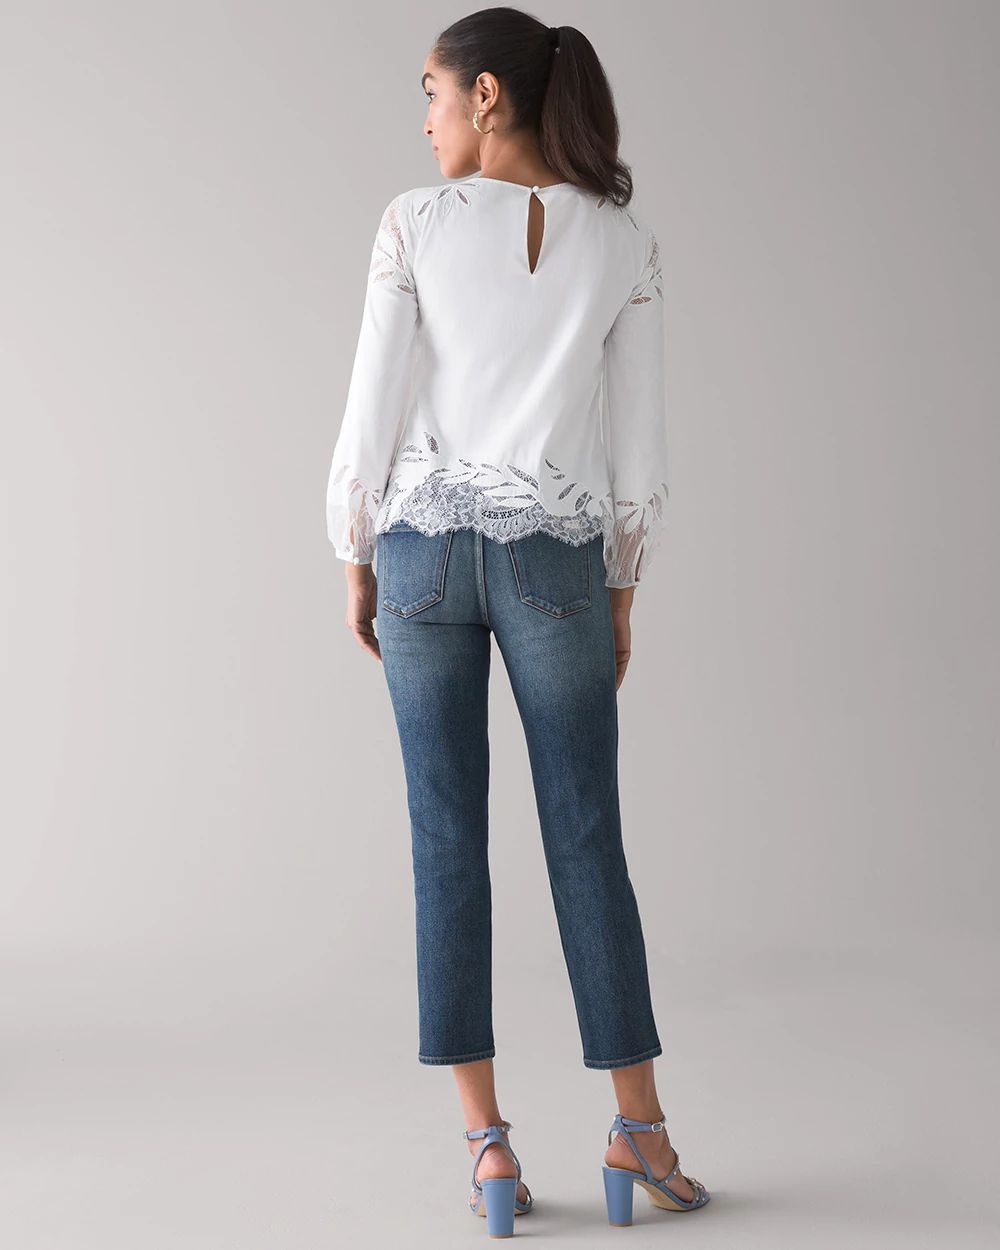 Petite Lace Inset Poplin Blouse click to view larger image.